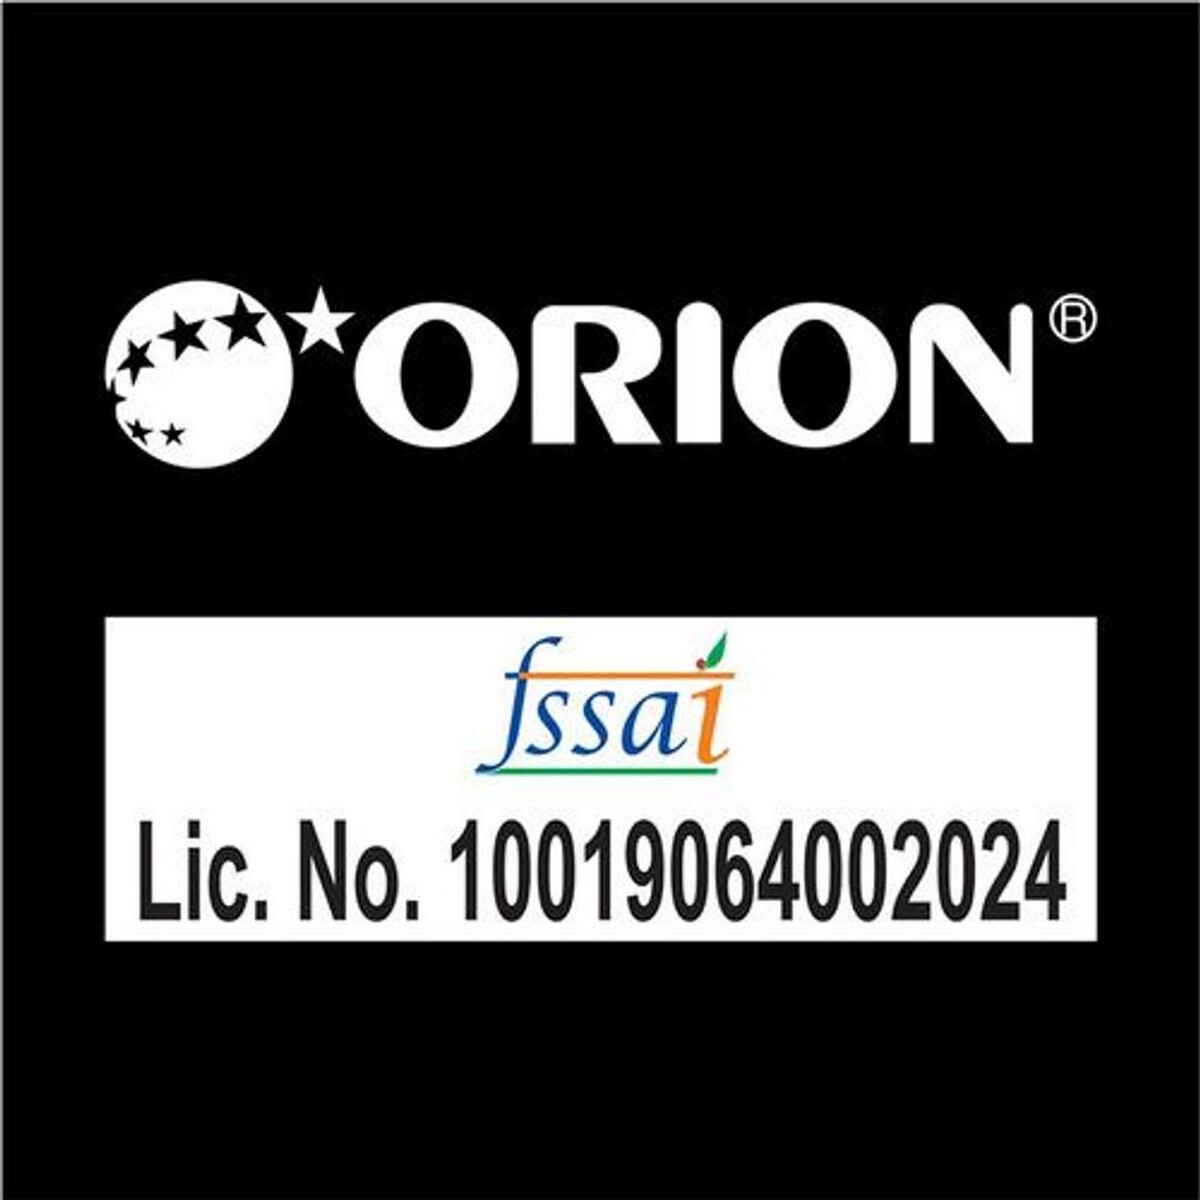 Orion Mexican Lime Corn Turtle Chip 70Gm